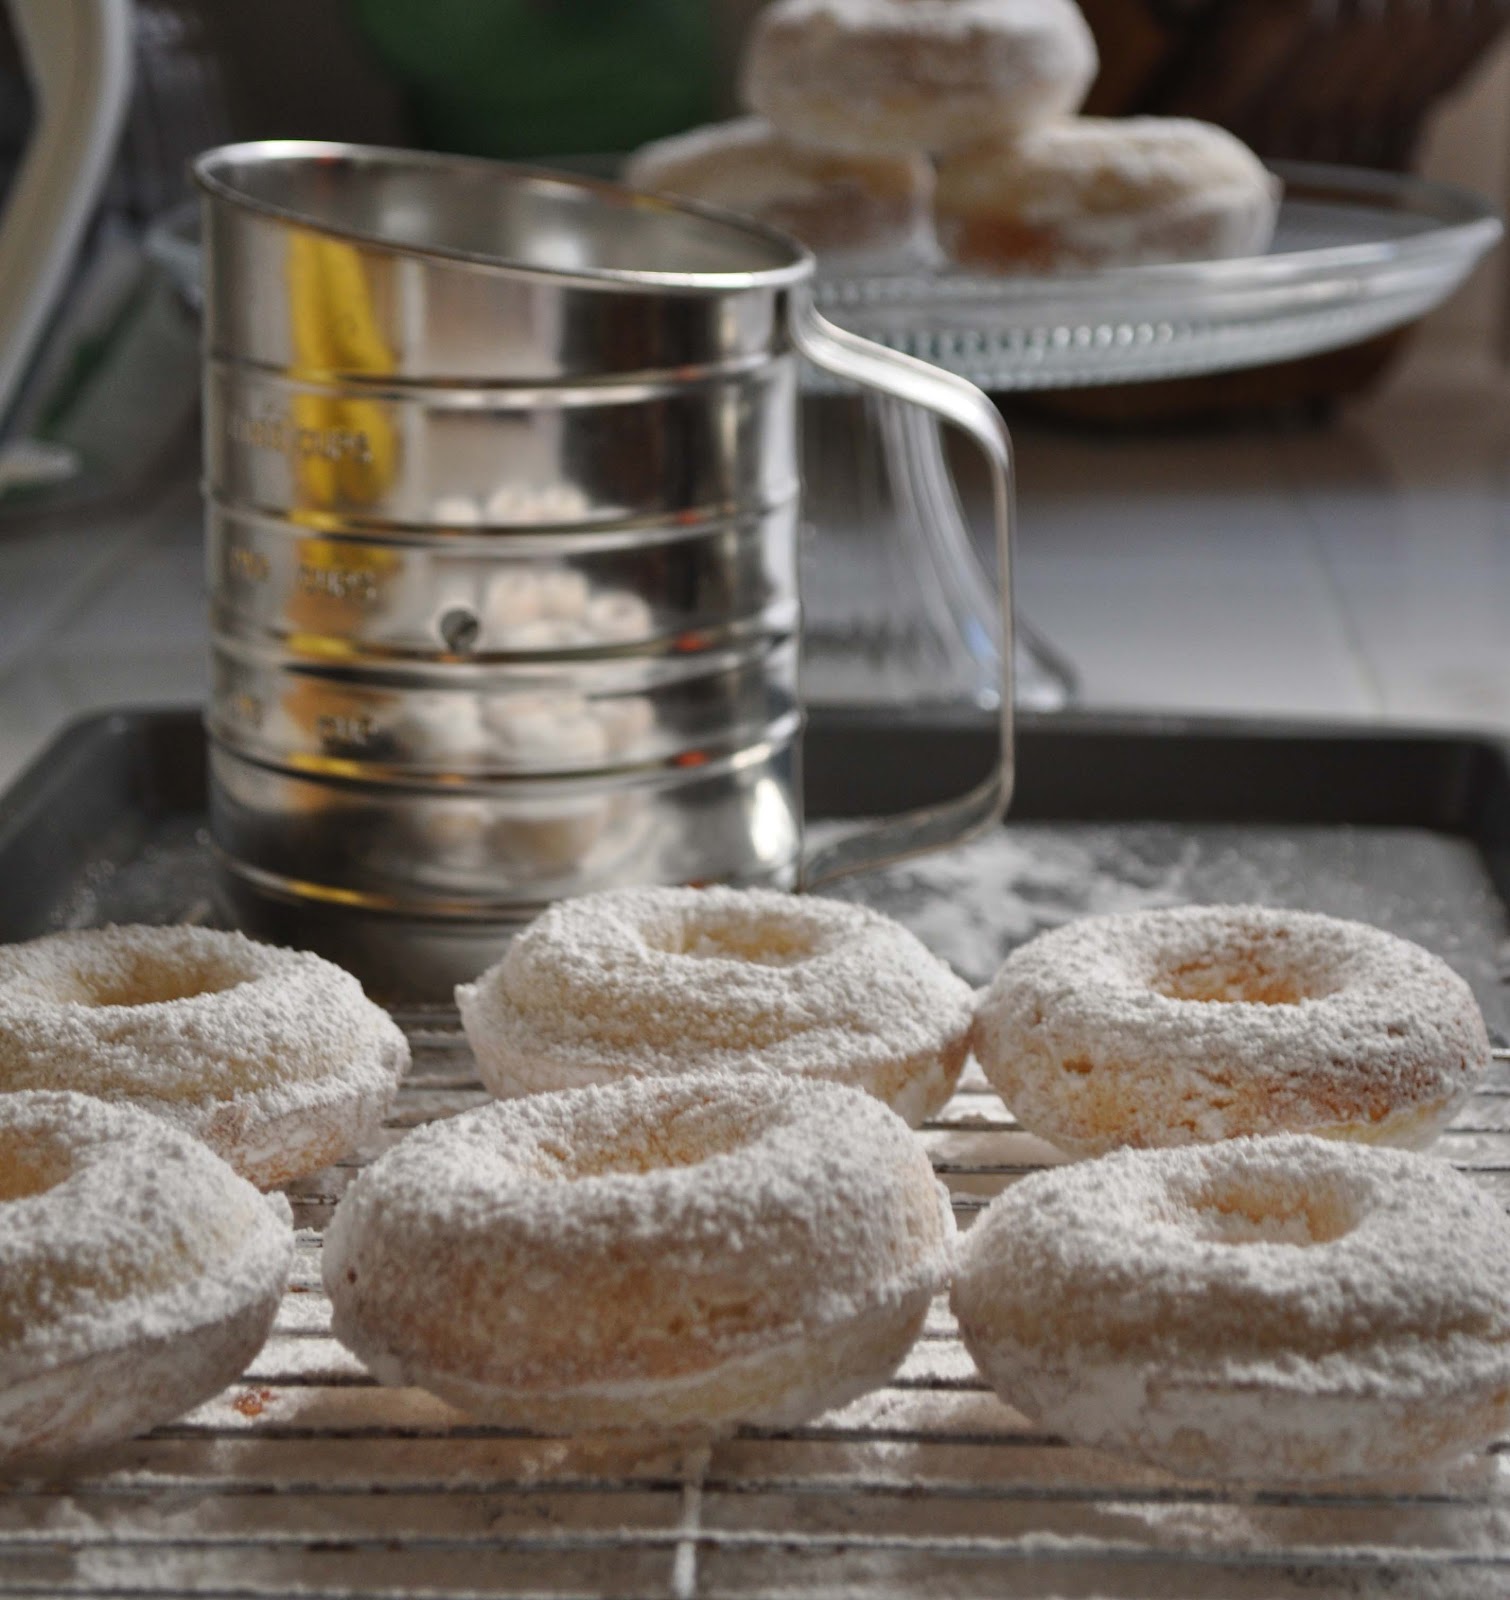 Baked Donuts Recipe Without Donut Pan